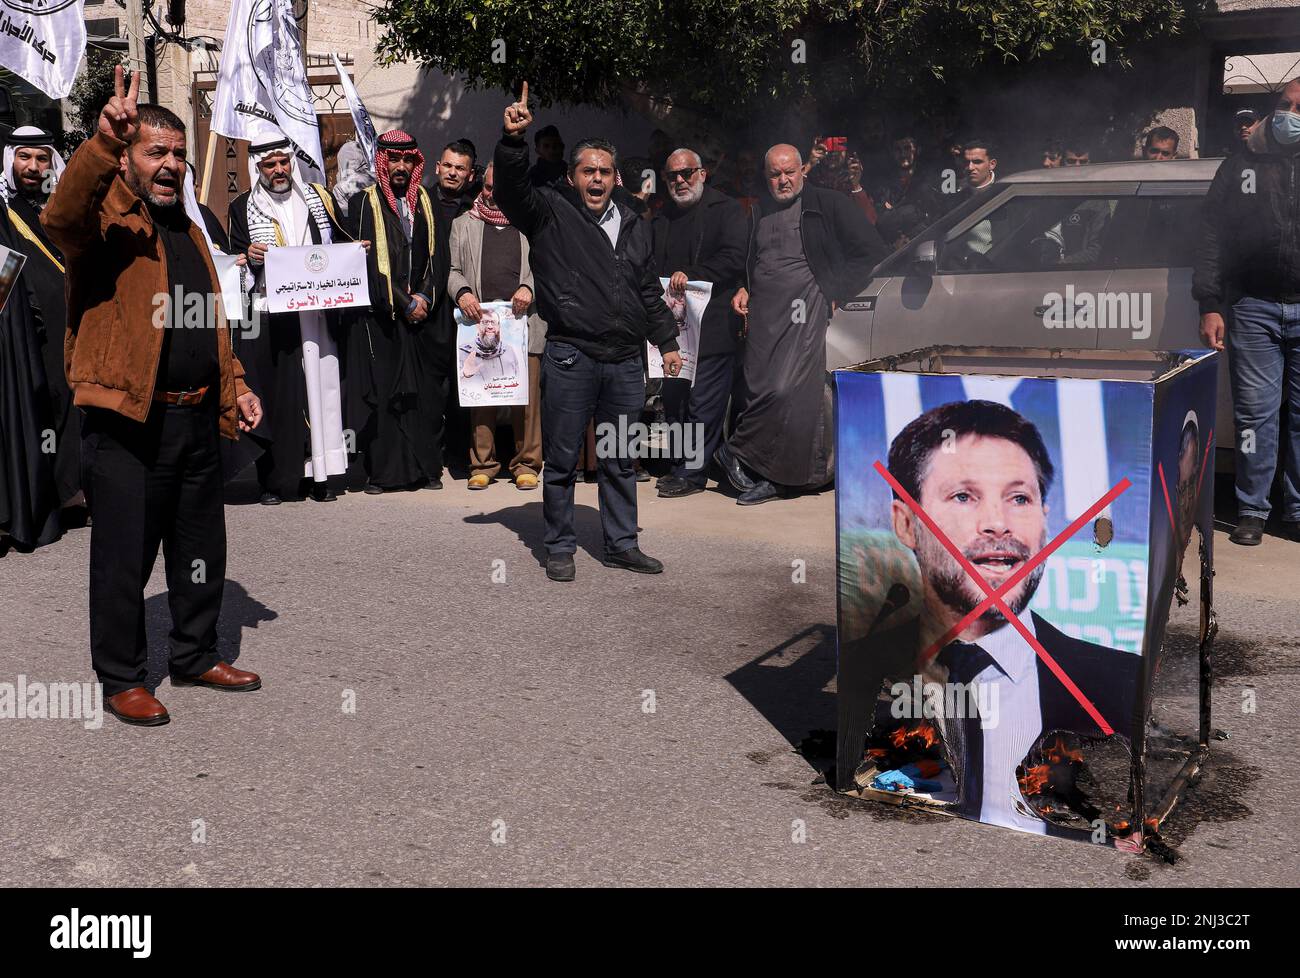 Gaza, Palestine. 31st Mar, 2018. Palestinians protesters burn a poster of Minister Bezalel Smotrich during a demonstration in support of Palestinian prisoners inside Israeli prisons. (Photo by Yousef Masoud/SOPA Images/Sipa USA) Credit: Sipa USA/Alamy Live News Stock Photo